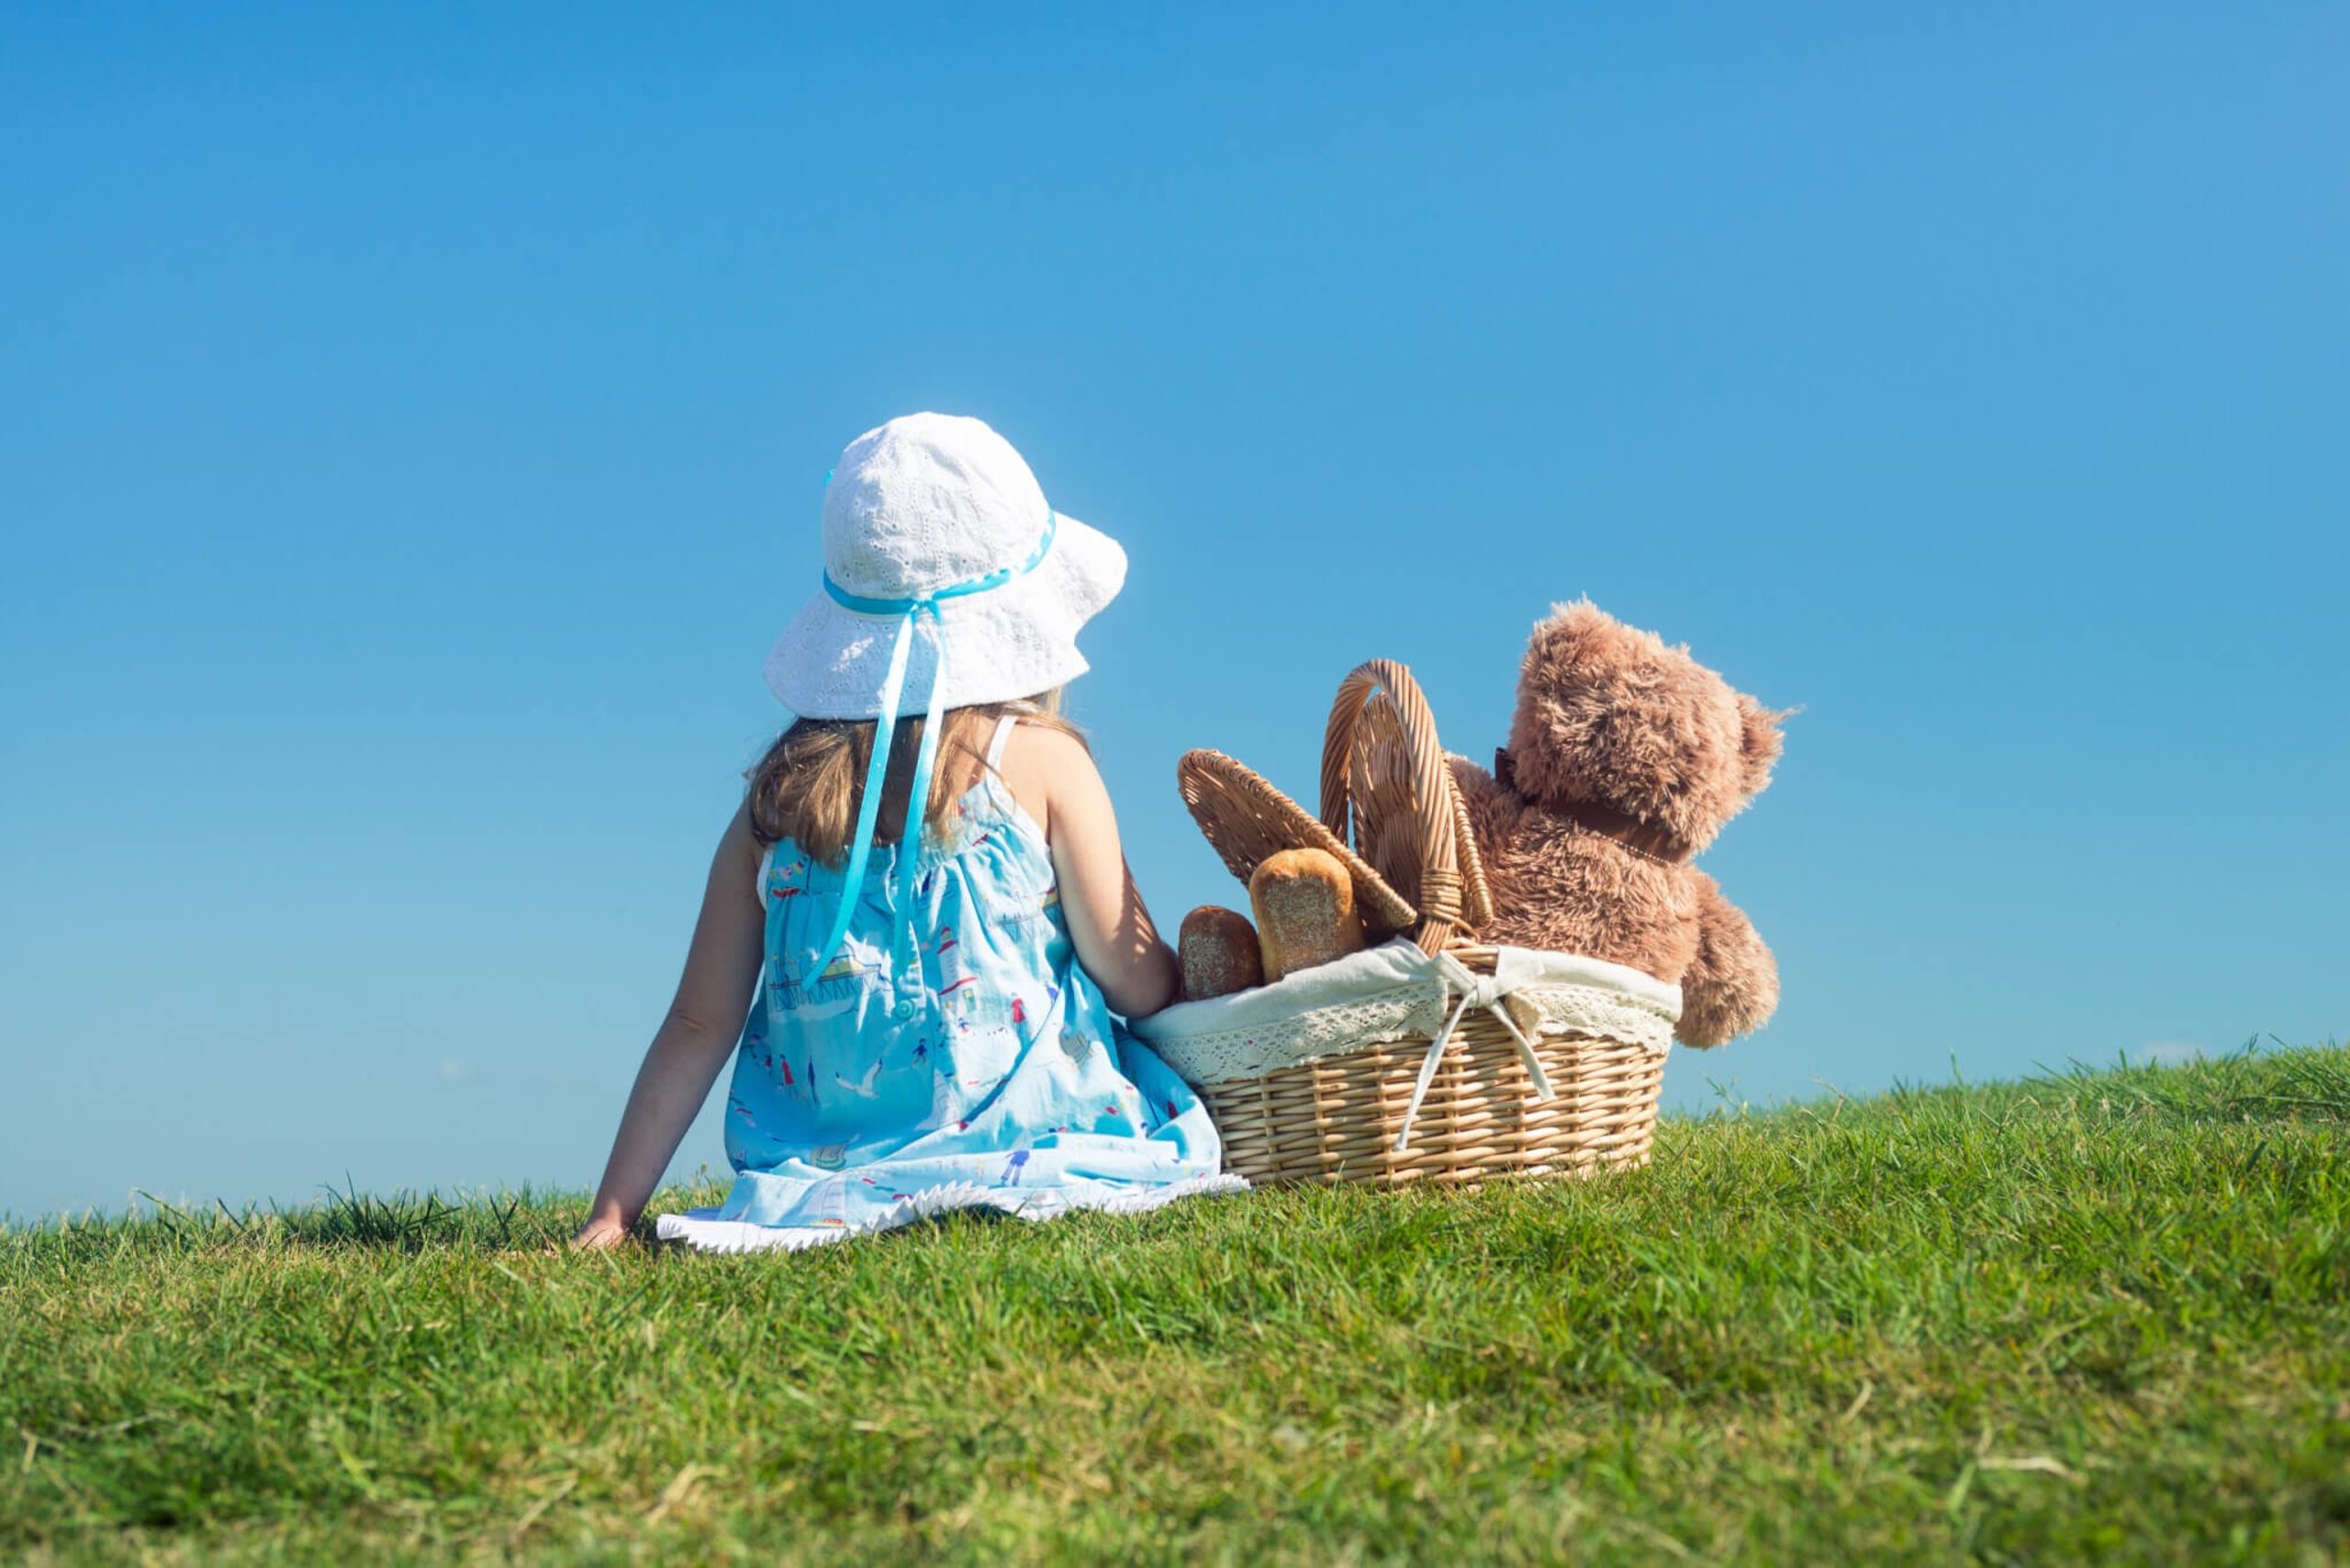 Teddy Bear Picnic Day (10th July) | Days Of The Year